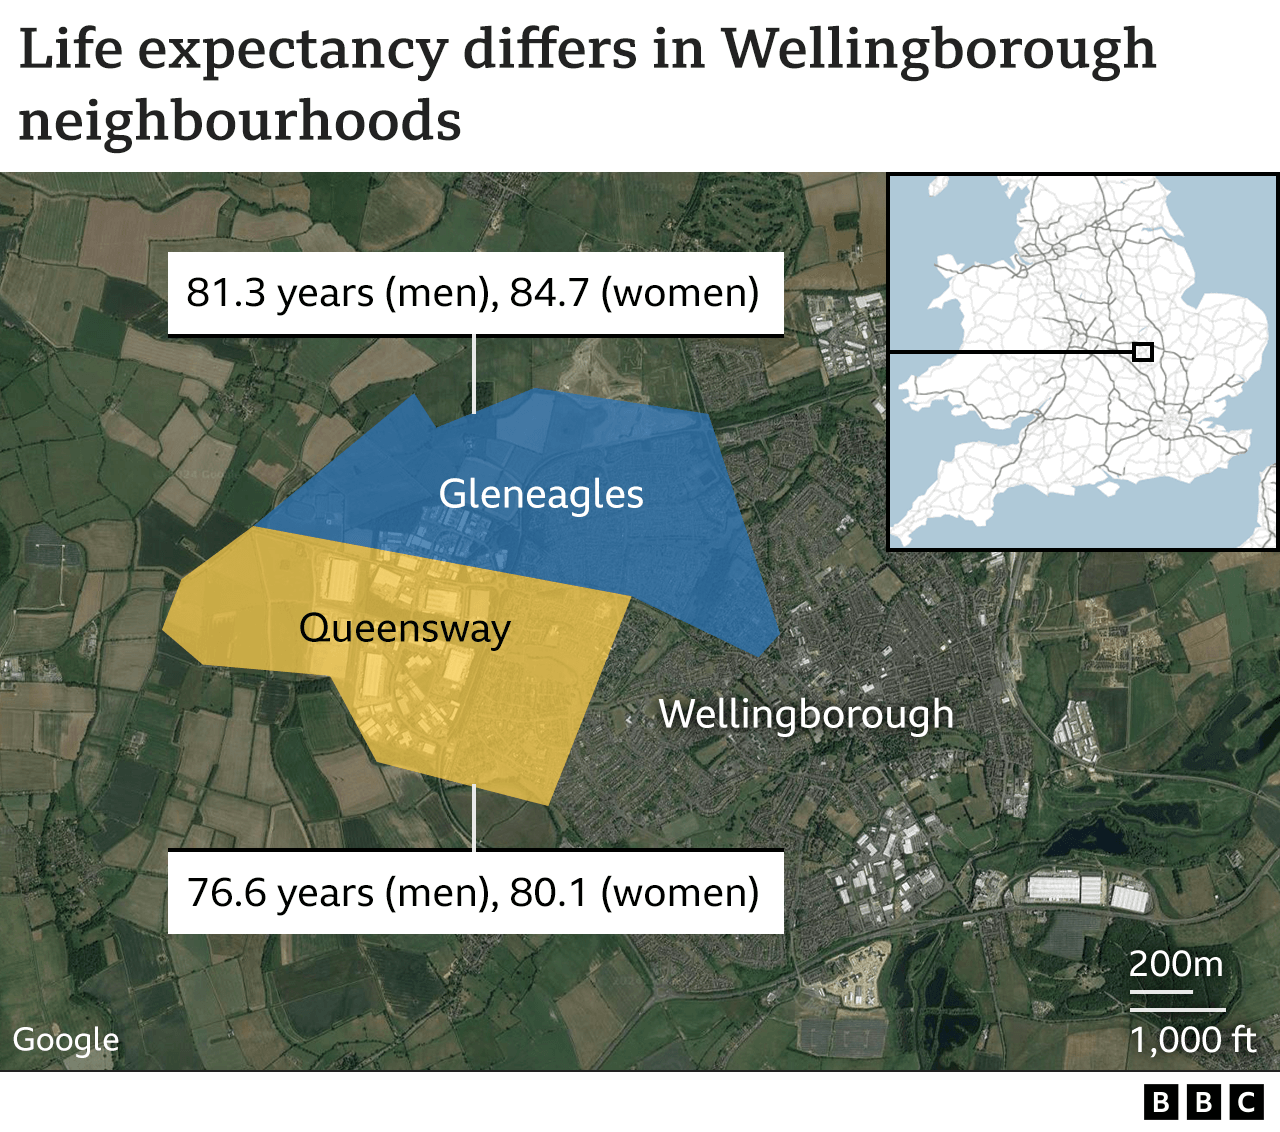 A map showing how life expectancy differs in two neighbouring parts of Wellingborough